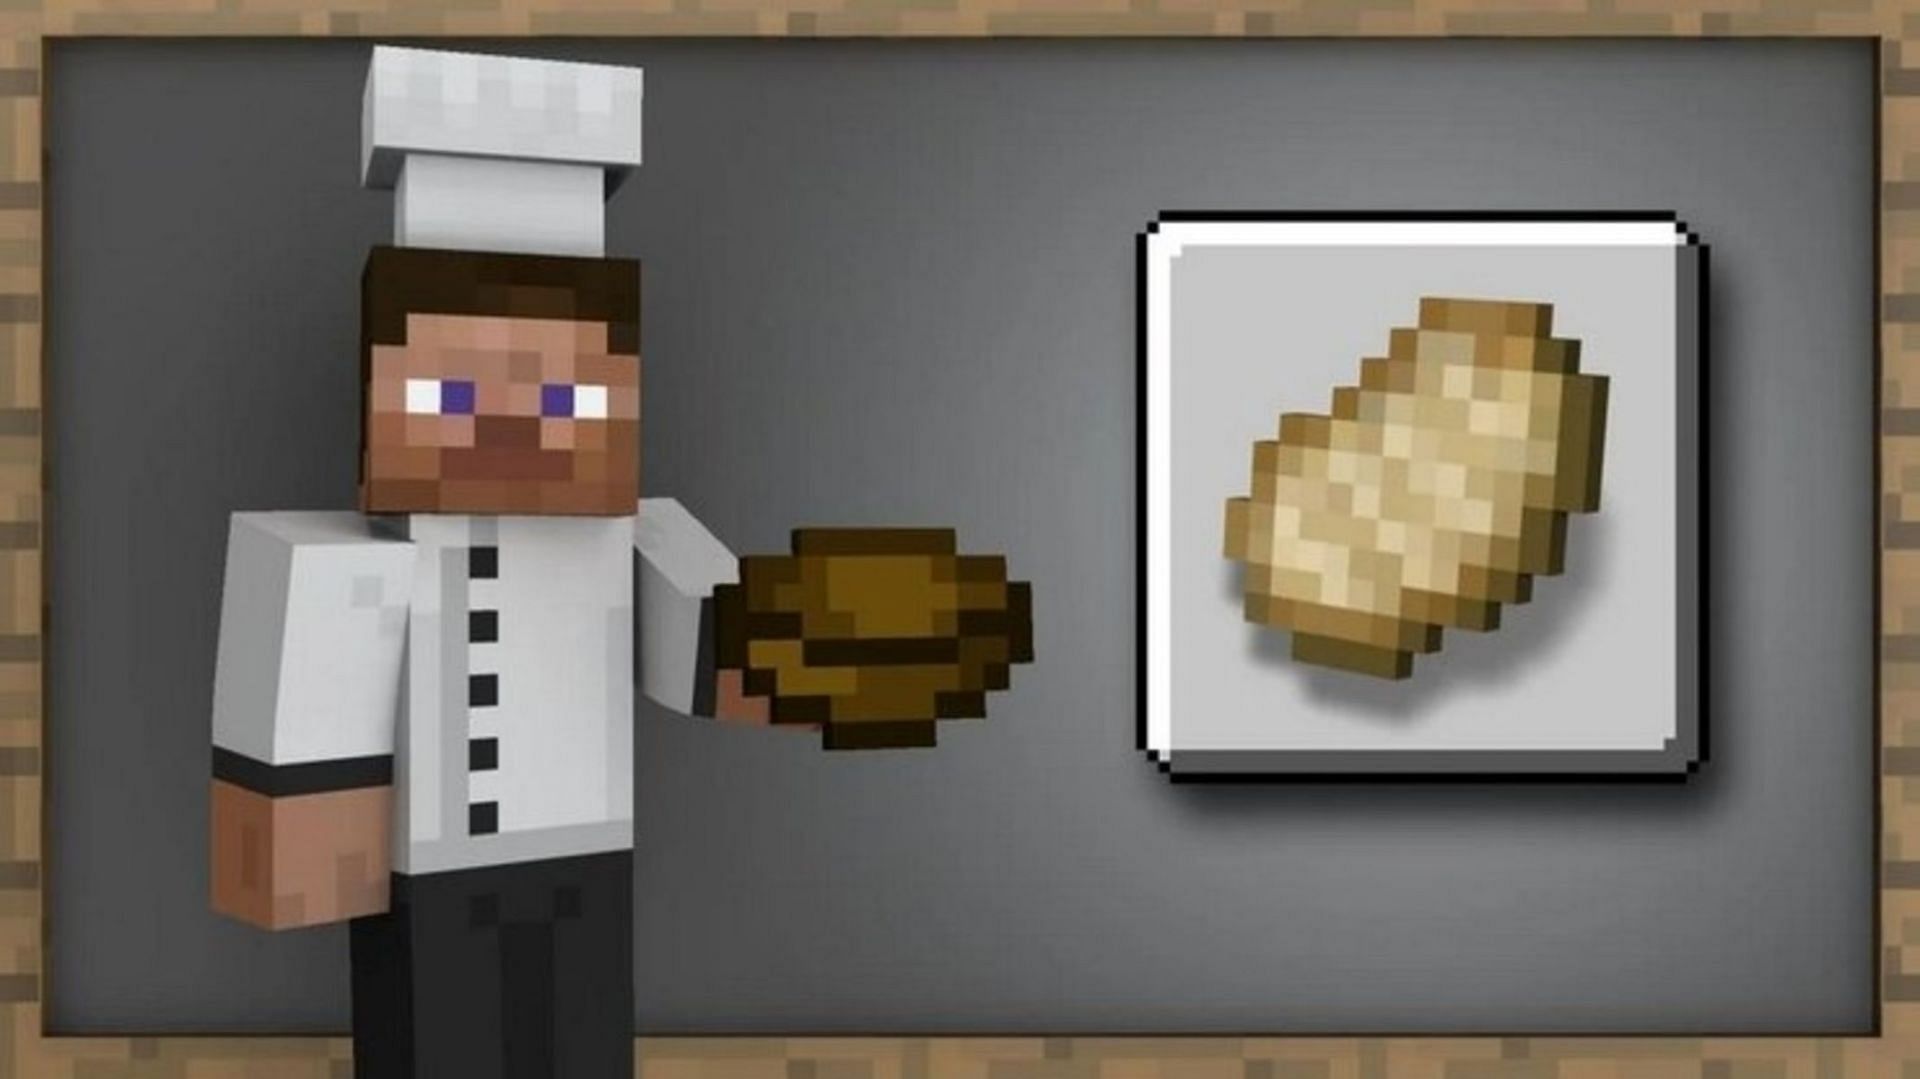 Cooked porkchops are a reliable and accessible food item (Image via Mojang)